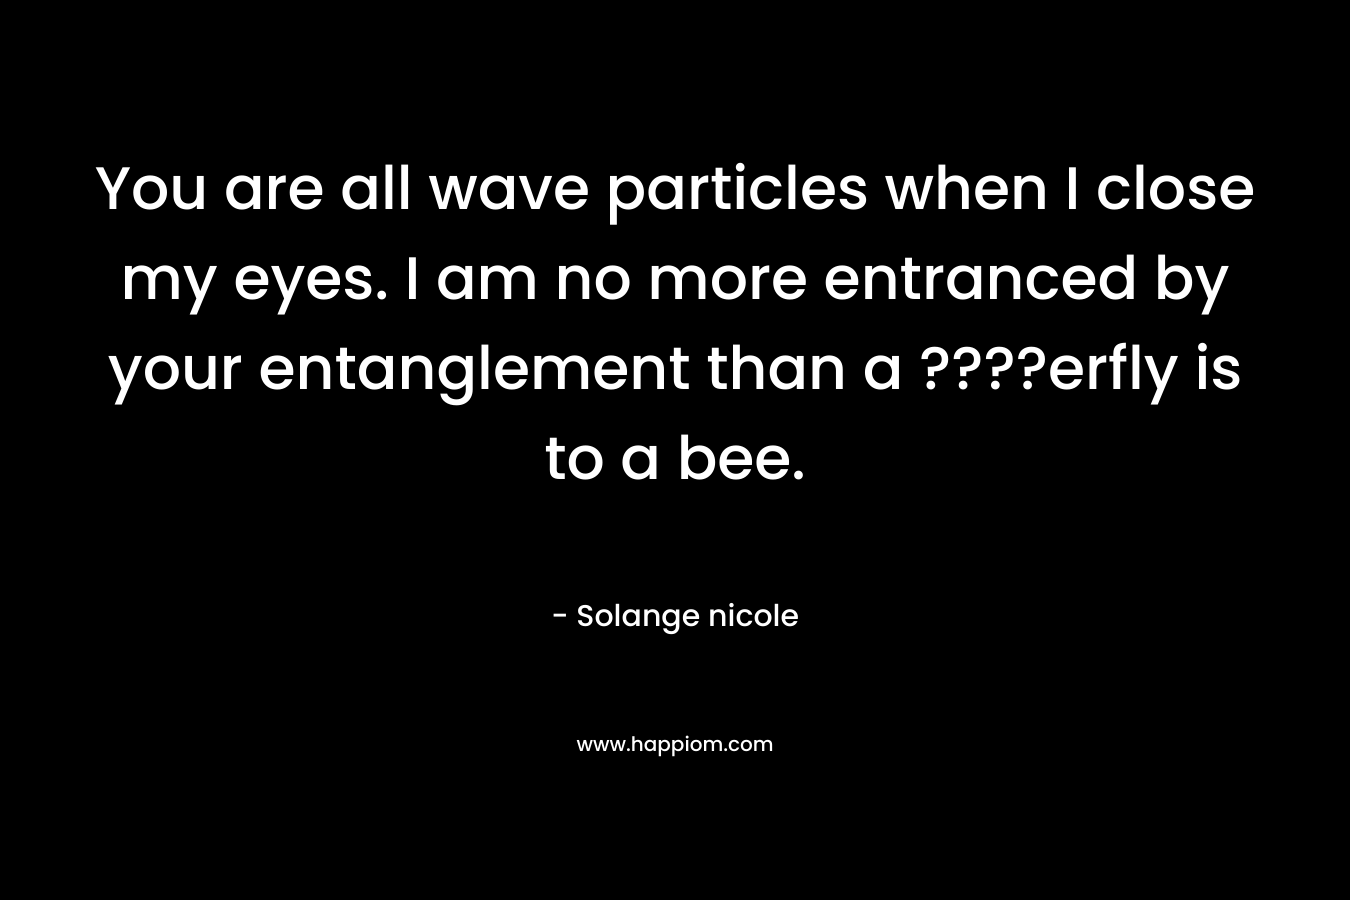 You are all wave particles when I close my eyes. I am no more entranced by your entanglement than a ????erfly is to a bee.